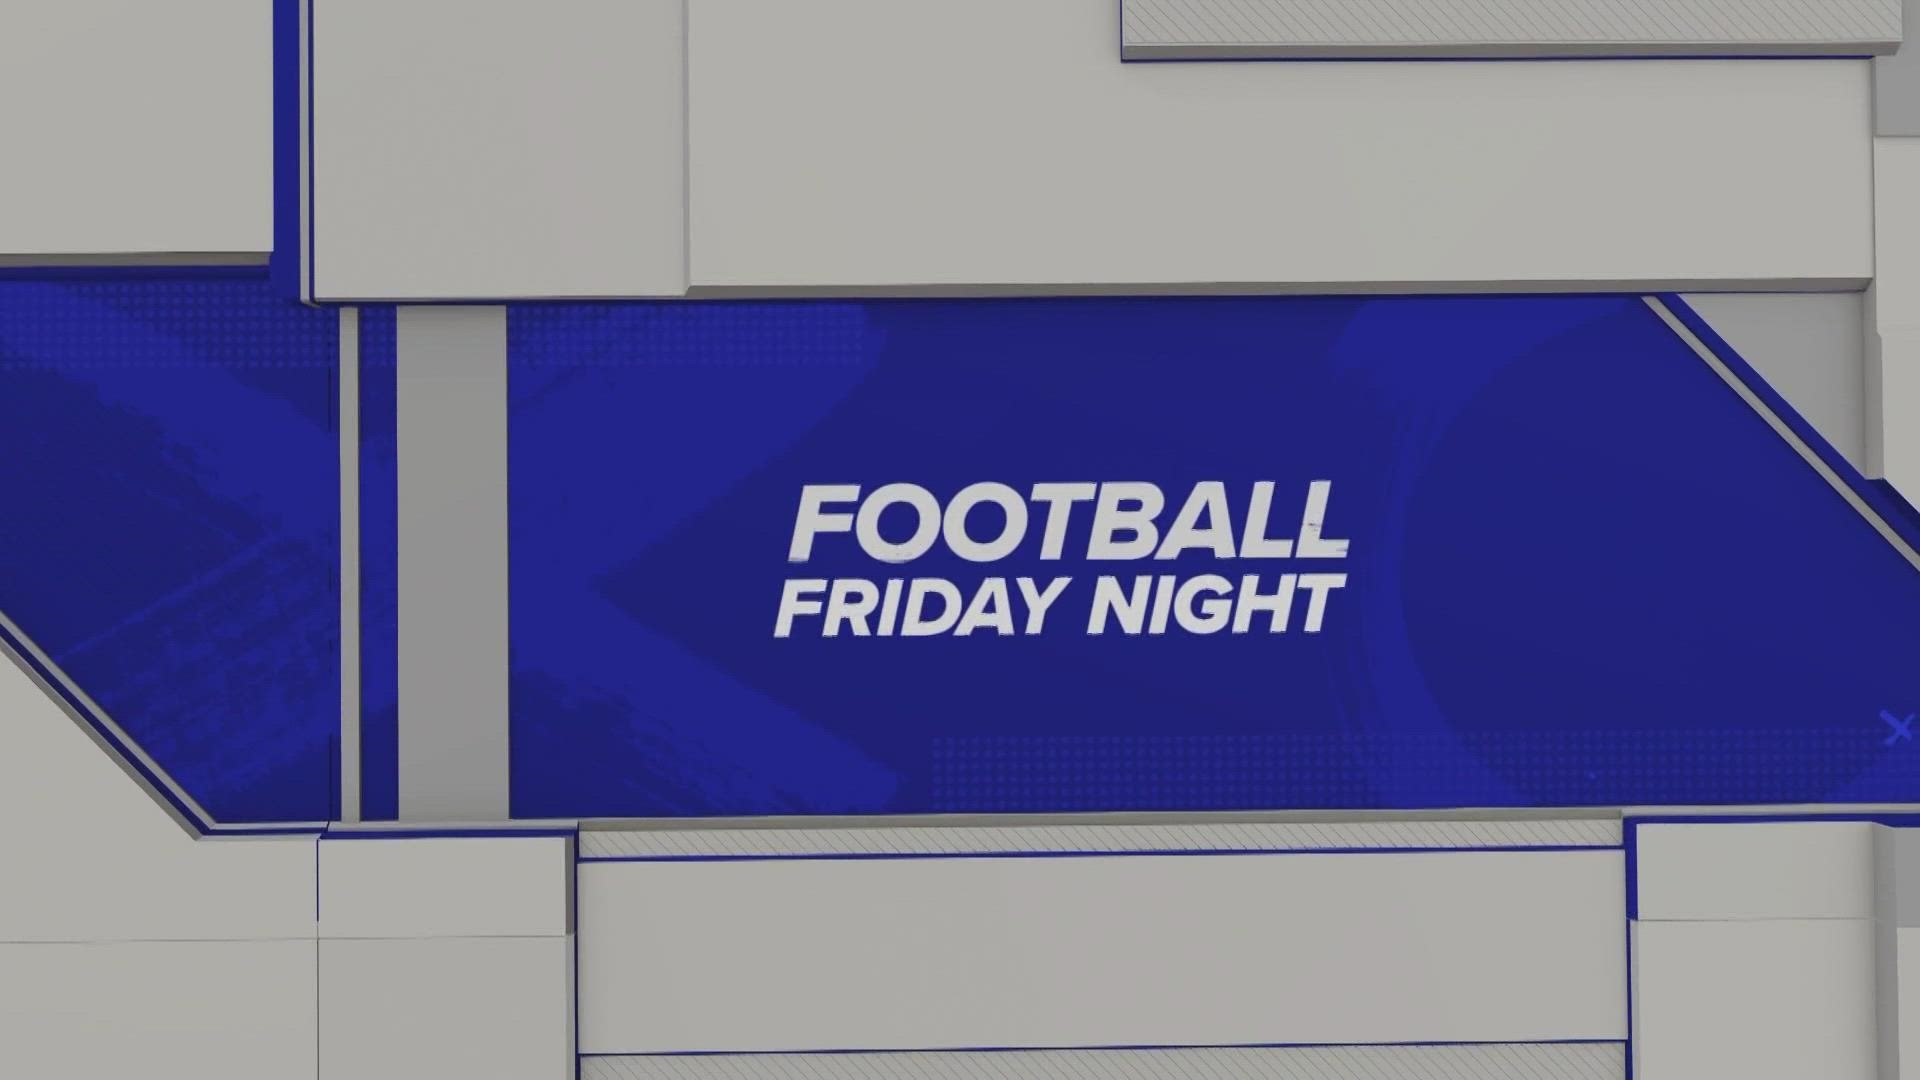 Here's a look at the first week of playoff scores and highlights for high school football!